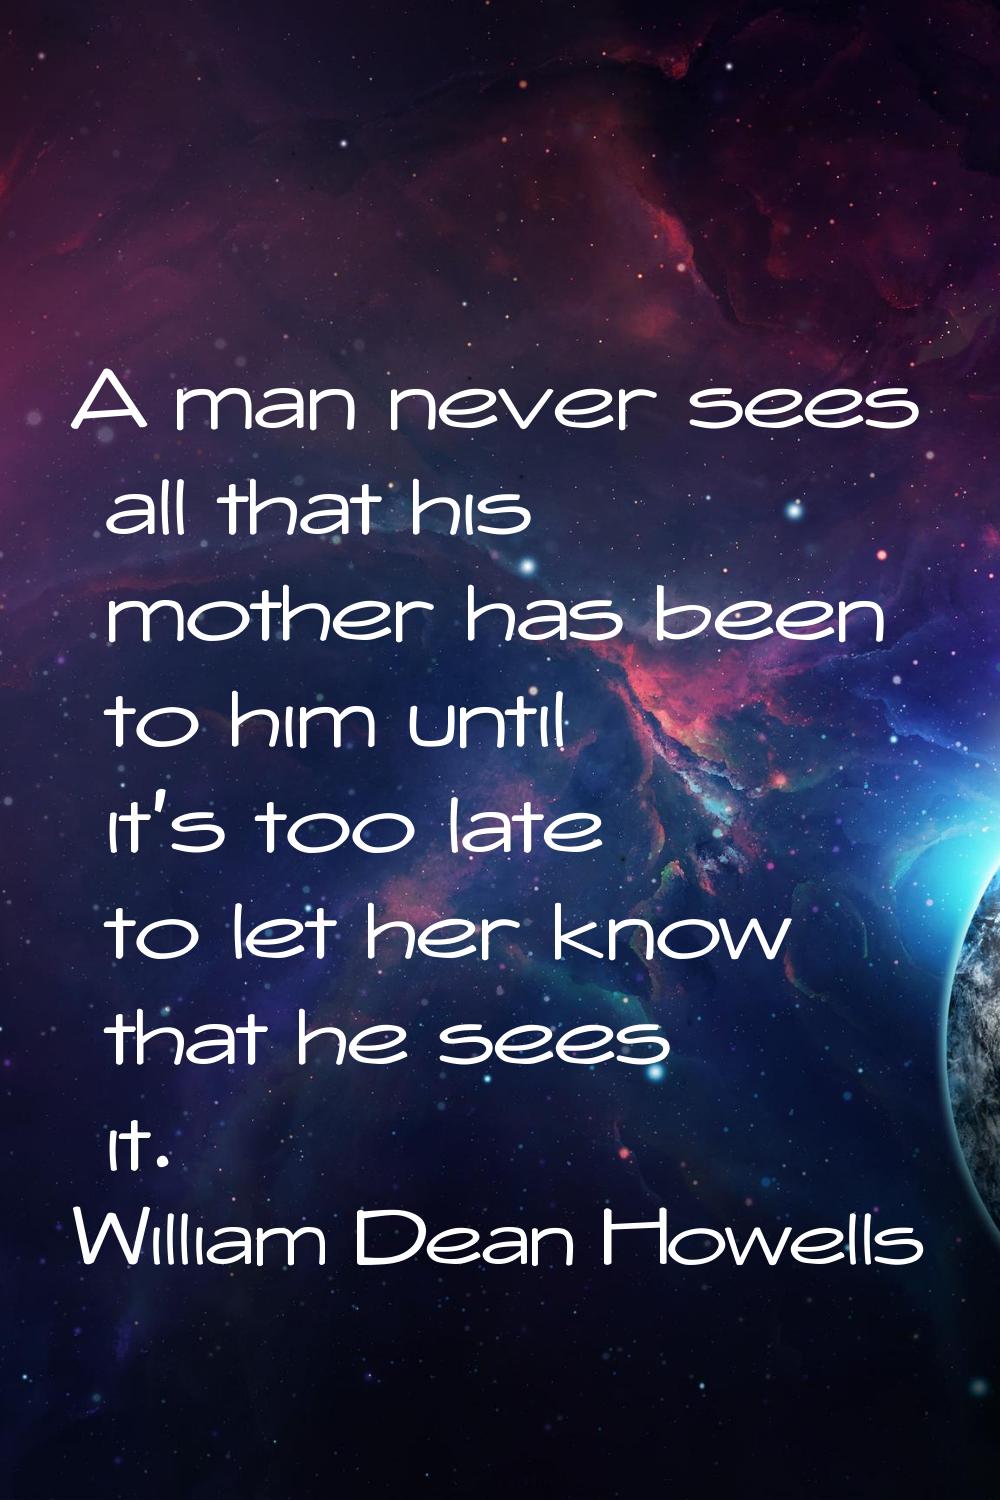 A man never sees all that his mother has been to him until it's too late to let her know that he se